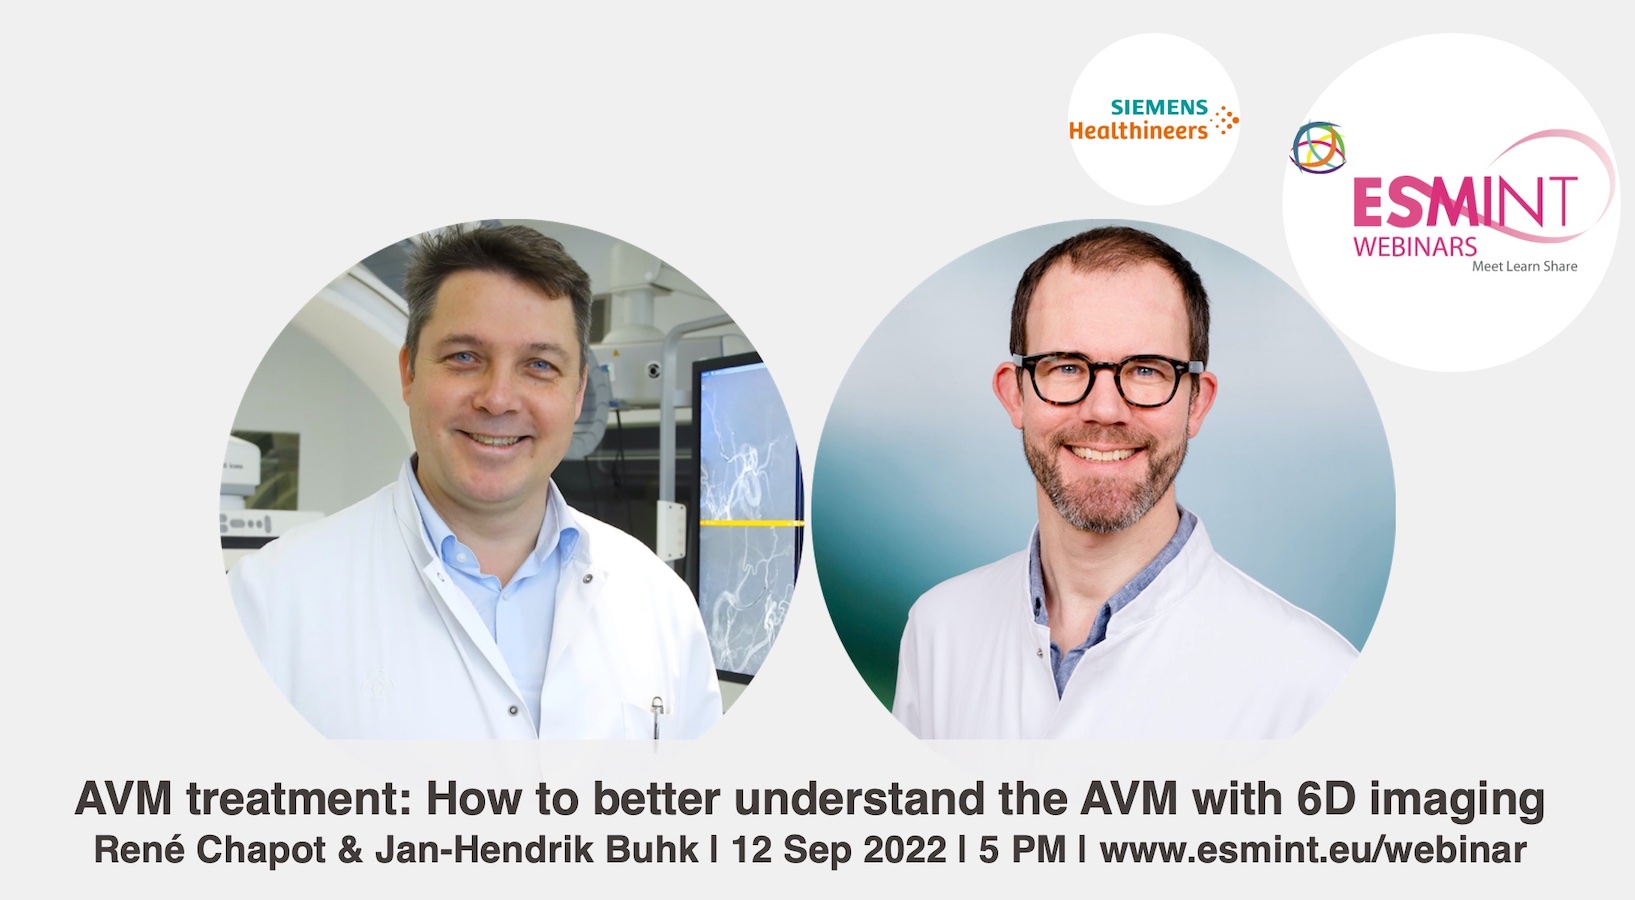 Webinar on AVM Treatment with Prof. Chapot and Dr. Buhk.